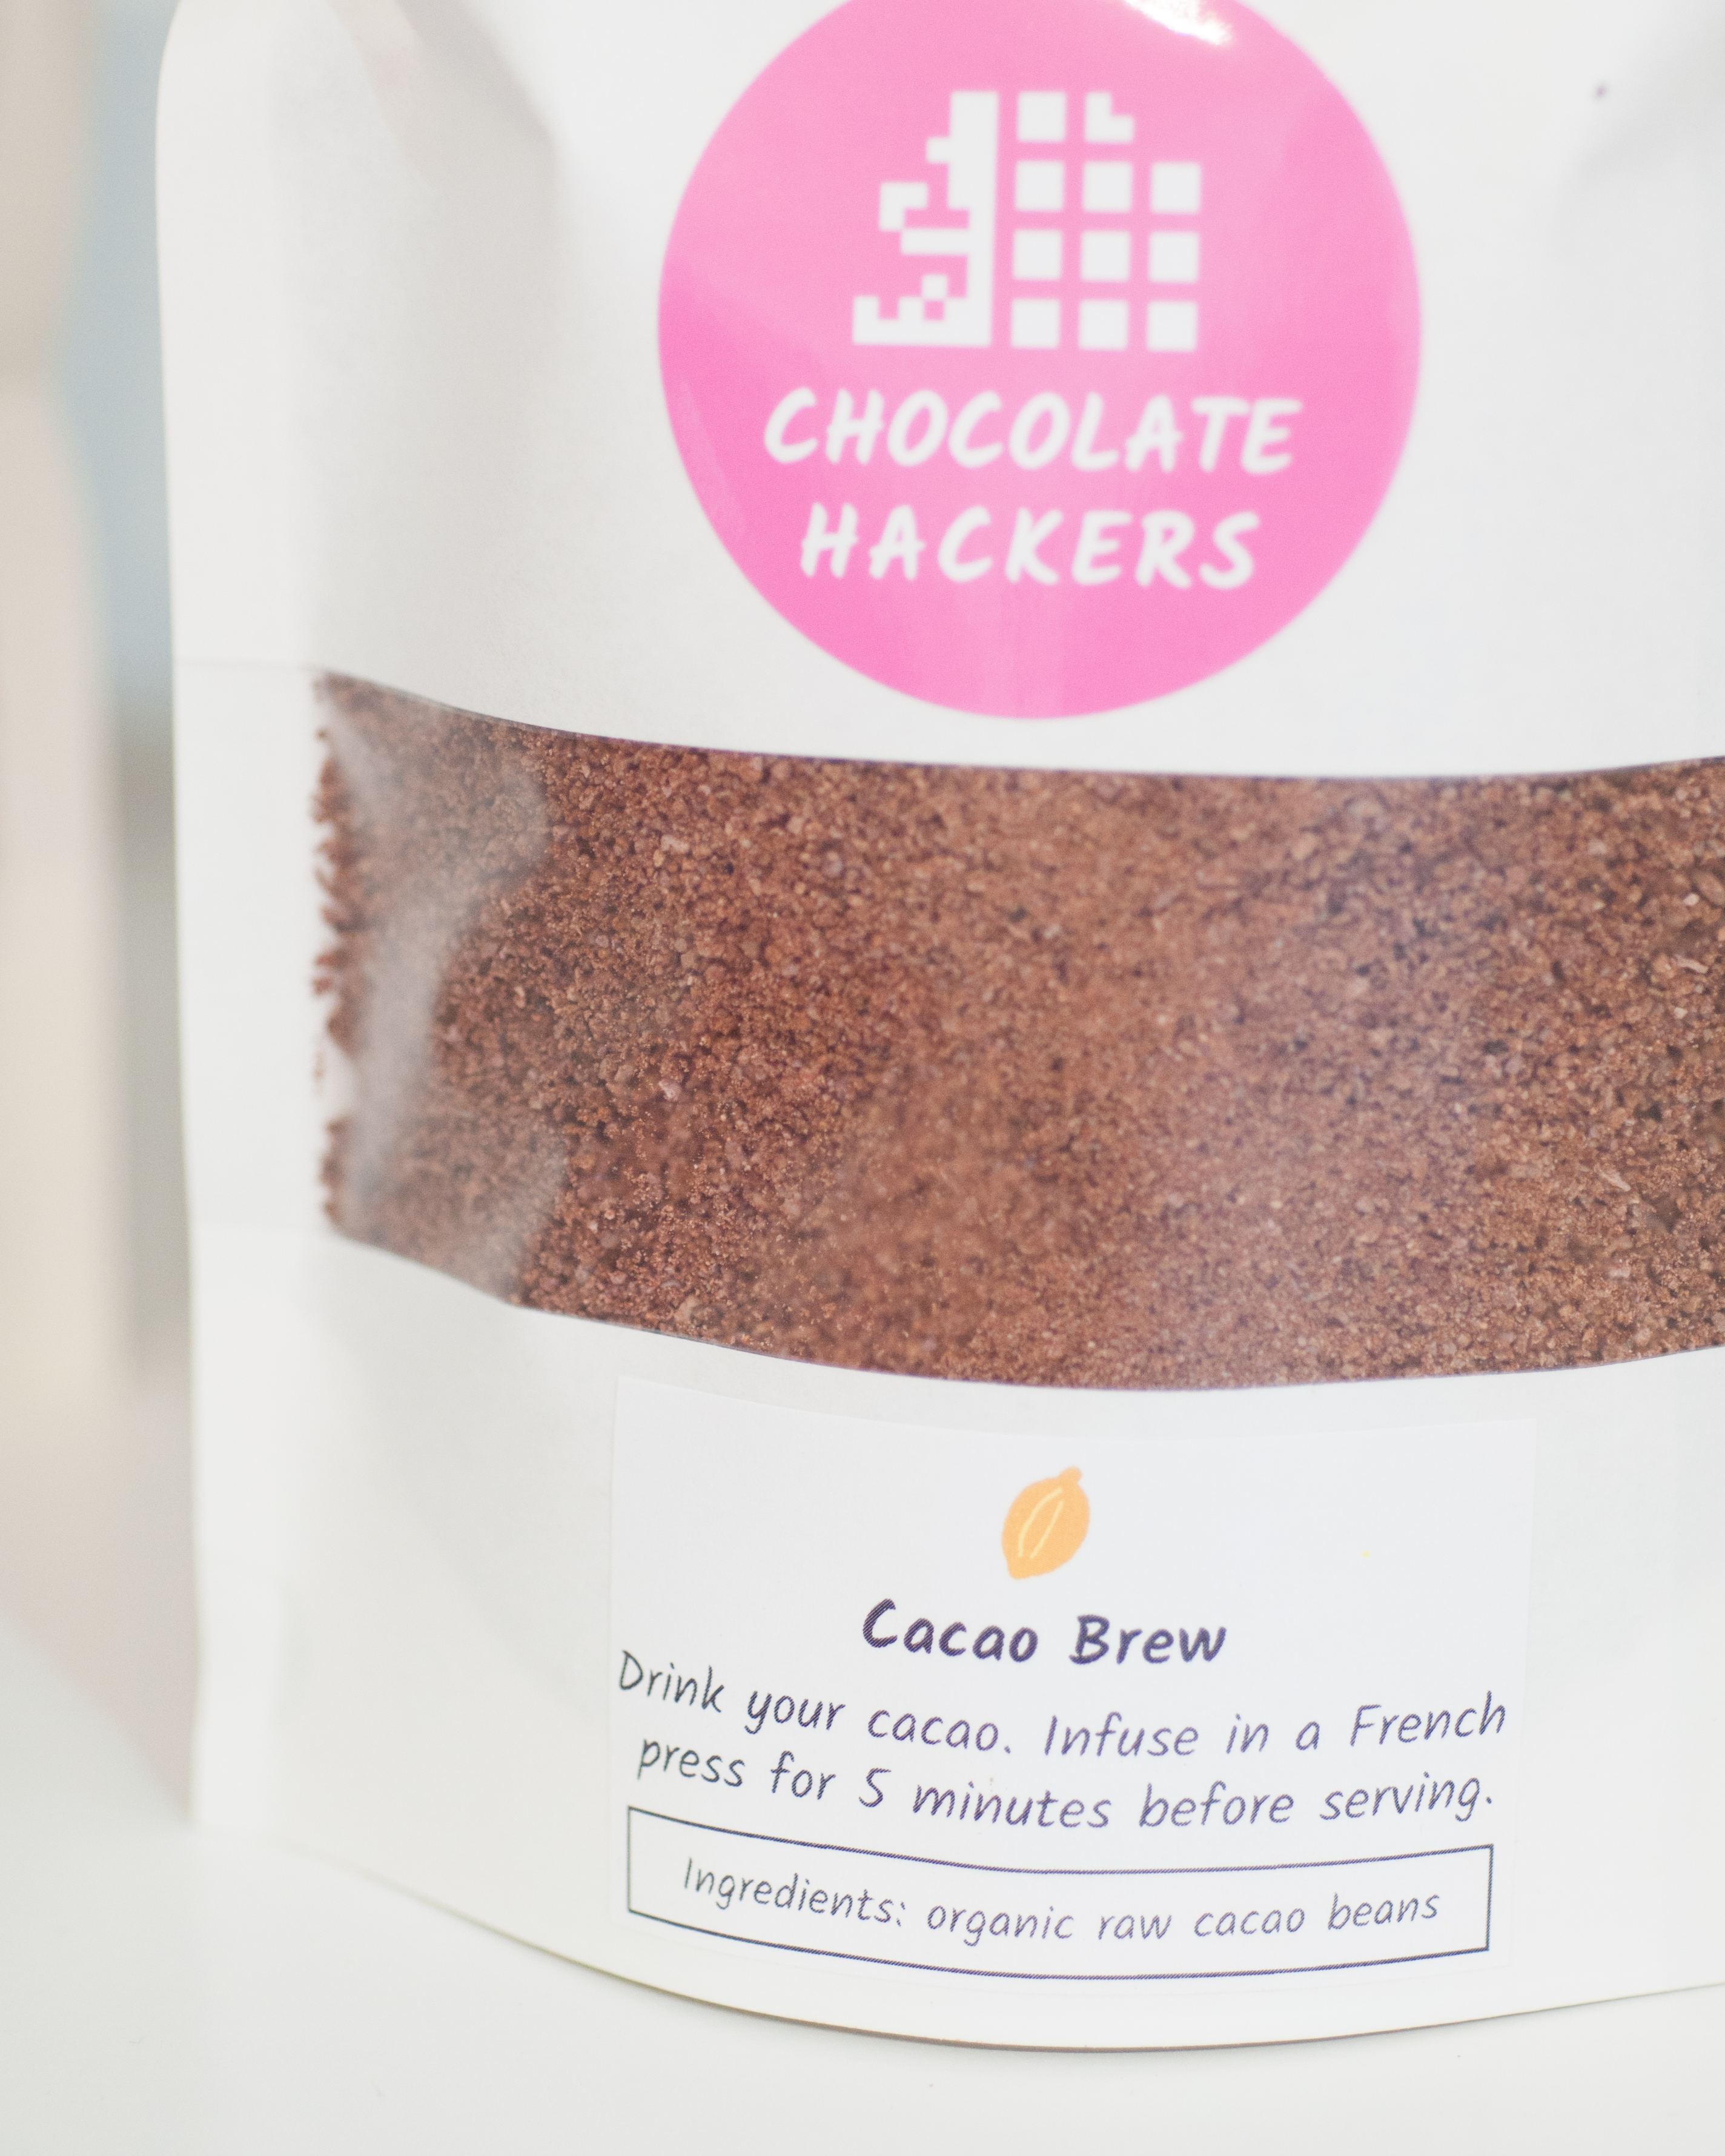 Cacao Brew by Chocolate Hackers